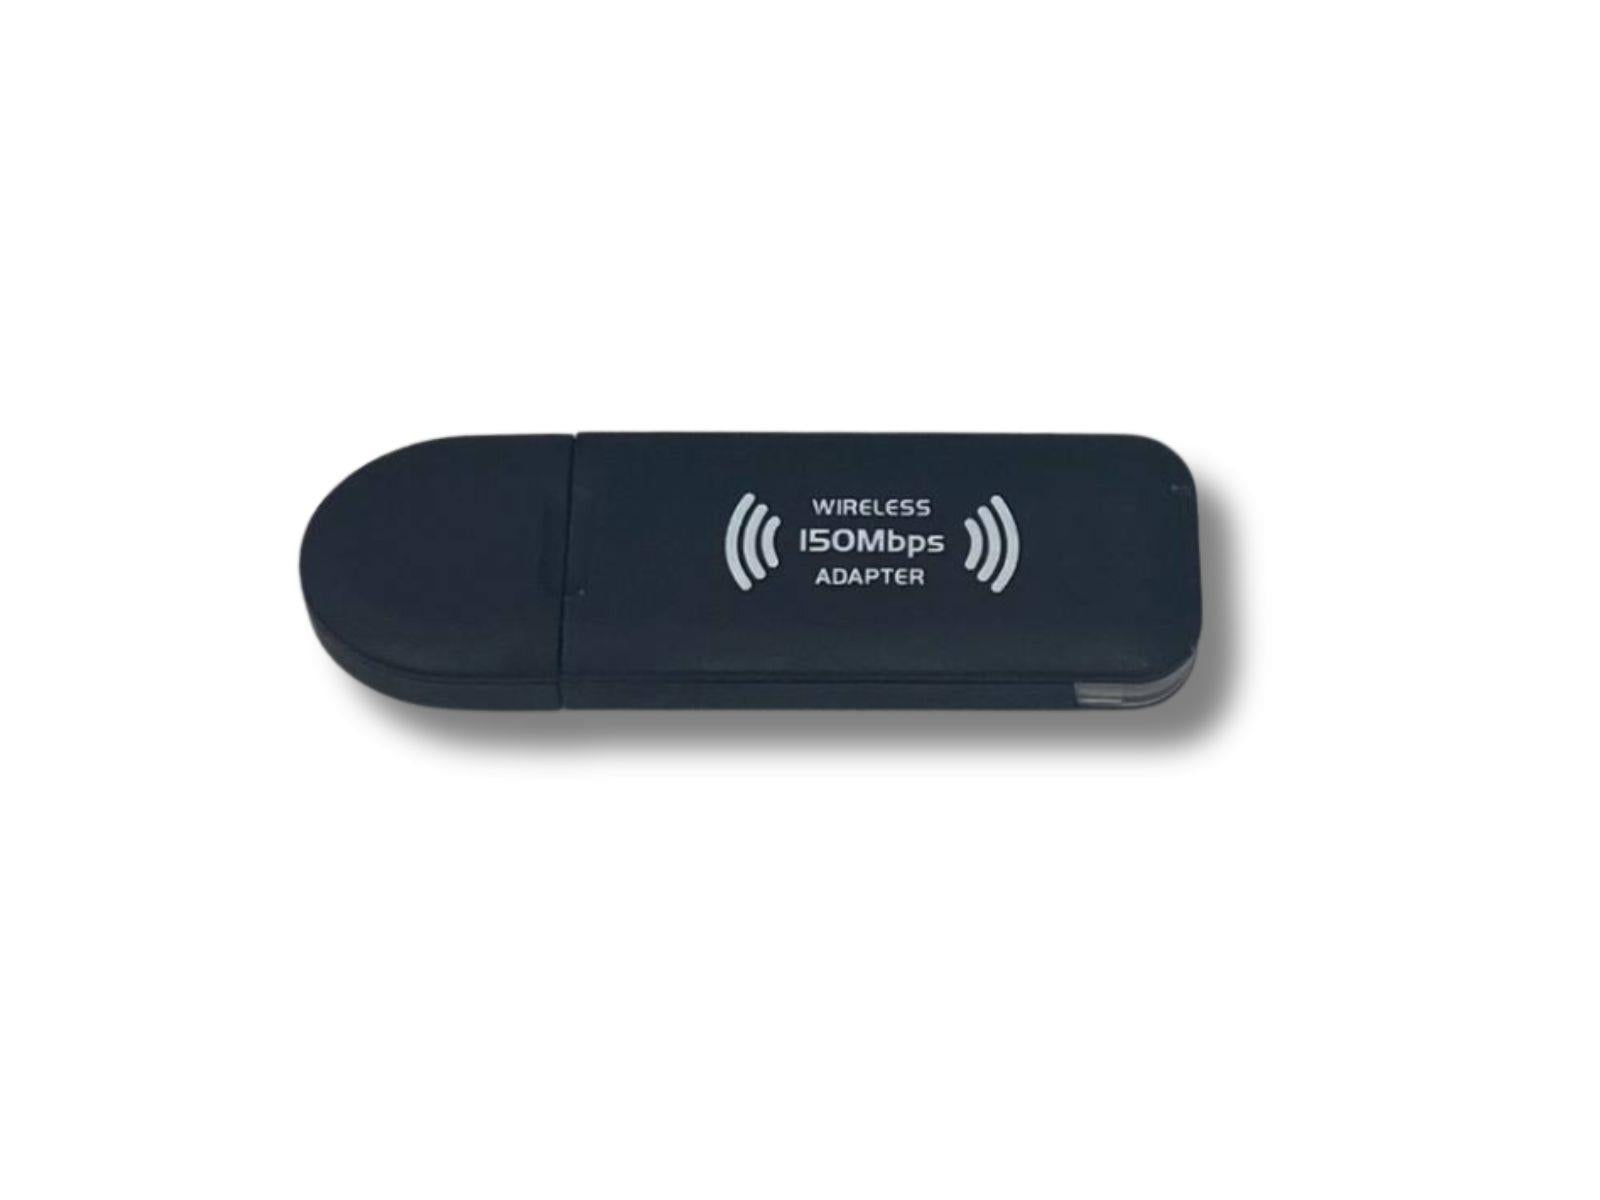 Humax WiFi Dongle Front